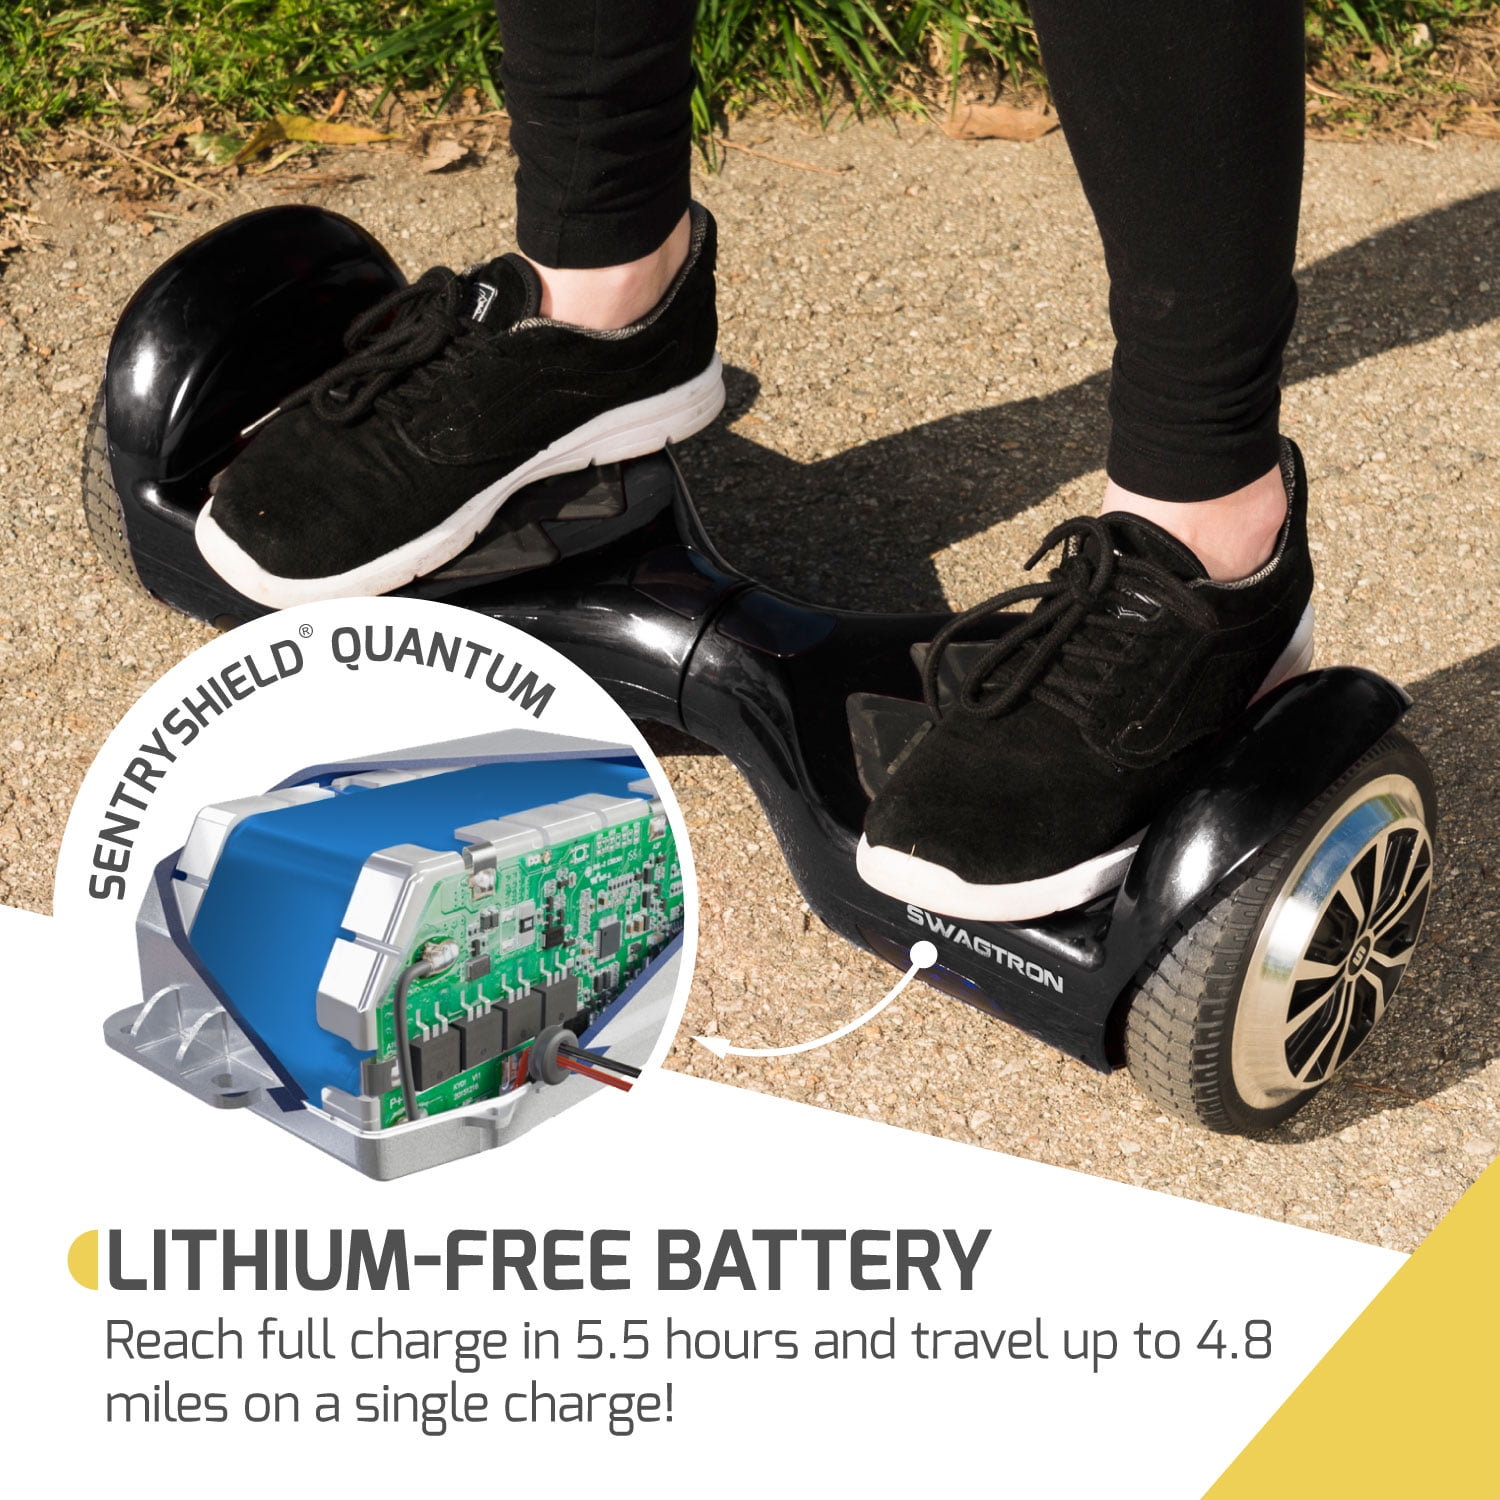 Hoverboard Fireproof Lithium Battery eCase - Solutions Department, LLC